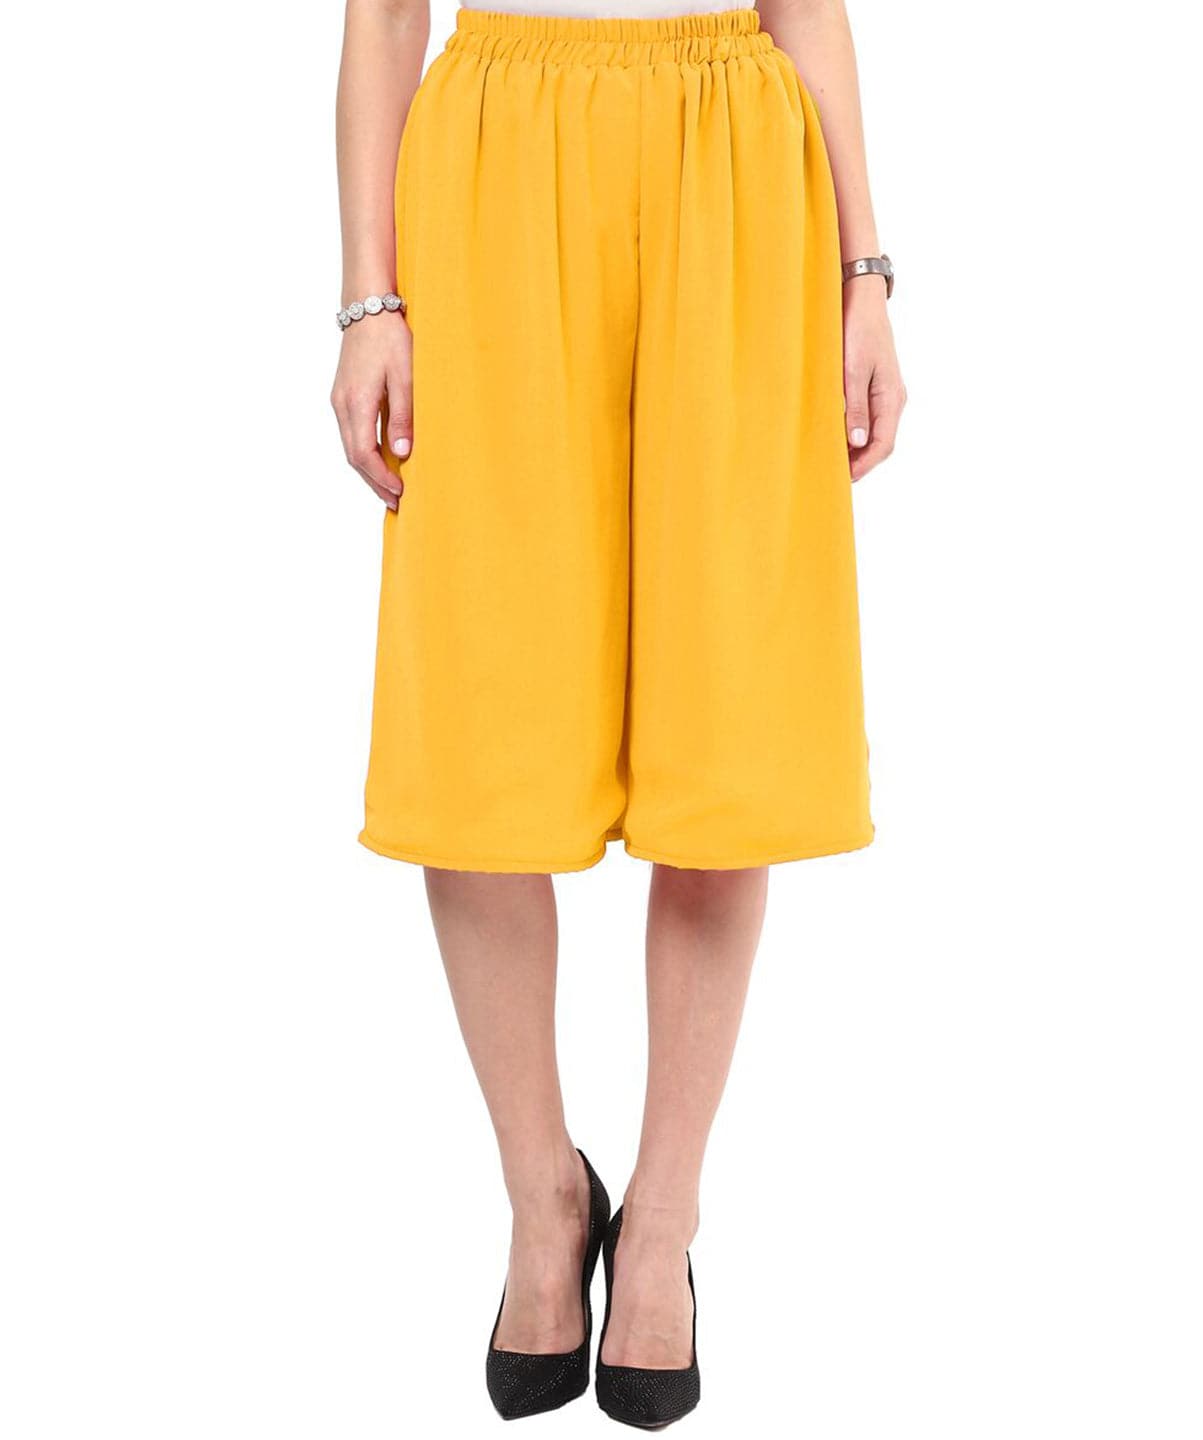 Yellow Georgette Adjustable Culottes - Uptownie